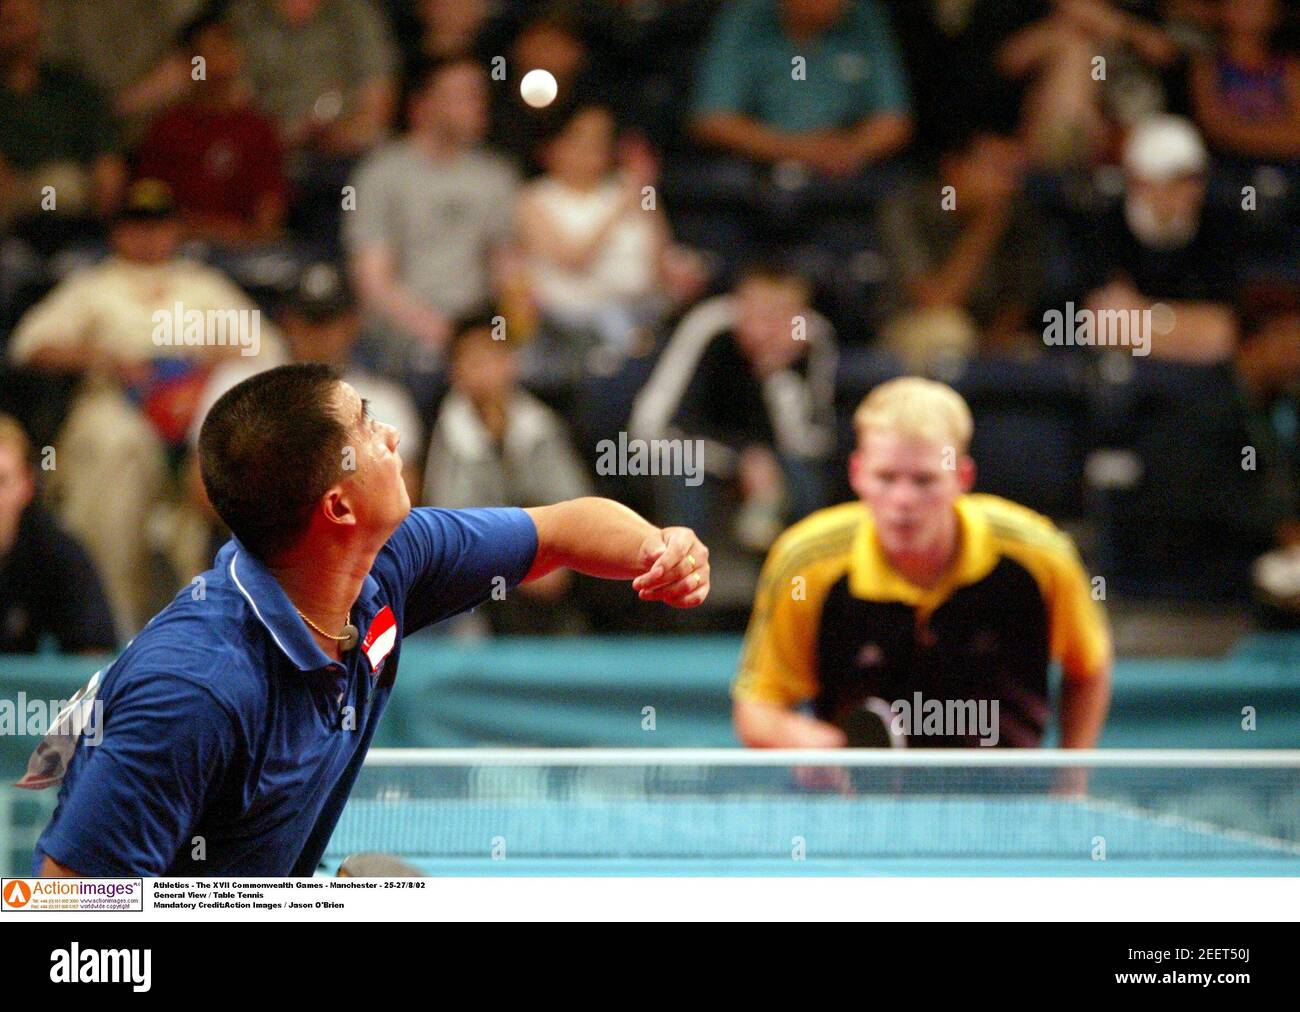 Table Tennis - The XVII Commonwealth Games - Manchester - 25-27/8/02  General Action / Table Tennis Mandatory Credit:Action Images / Jason  O'Brien Stock Photo - Alamy